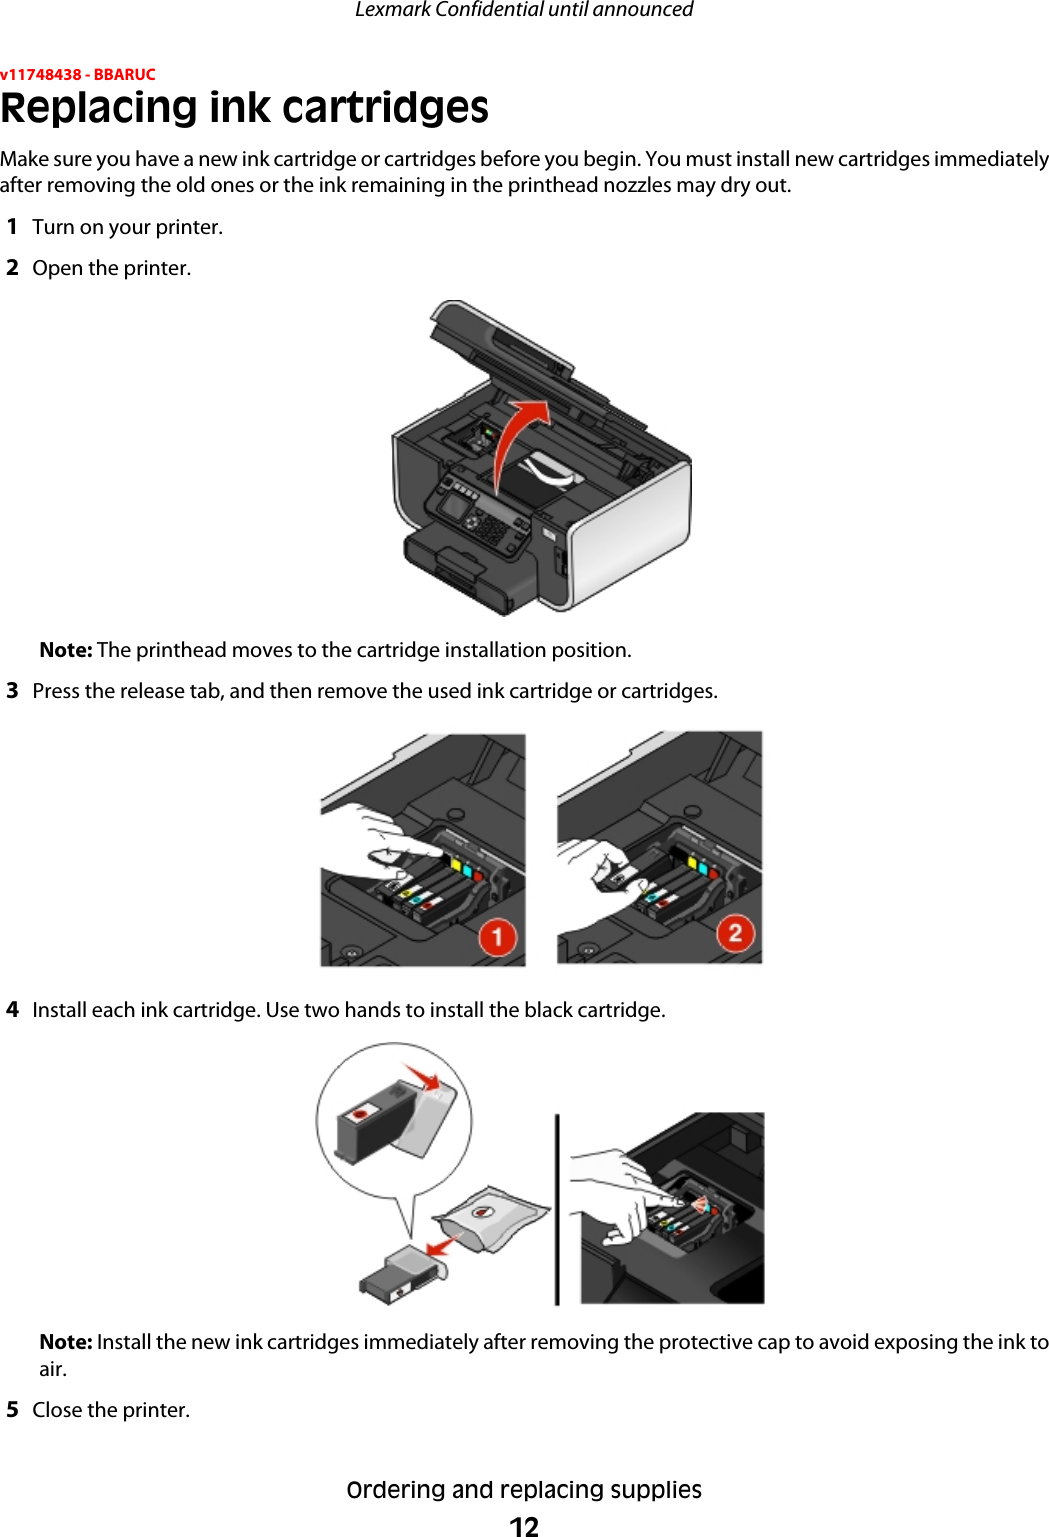 v11748438 - BBARUCReplacing ink cartridgesMake sure you have a new ink cartridge or cartridges before you begin. You must install new cartridges immediatelyafter removing the old ones or the ink remaining in the printhead nozzles may dry out.1Turn on your printer.2Open the printer.Note: The printhead moves to the cartridge installation position.3Press the release tab, and then remove the used ink cartridge or cartridges.4Install each ink cartridge. Use two hands to install the black cartridge.Note: Install the new ink cartridges immediately after removing the protective cap to avoid exposing the ink toair.5Close the printer.Lexmark Confidential until announcedOrdering and replacing supplies12